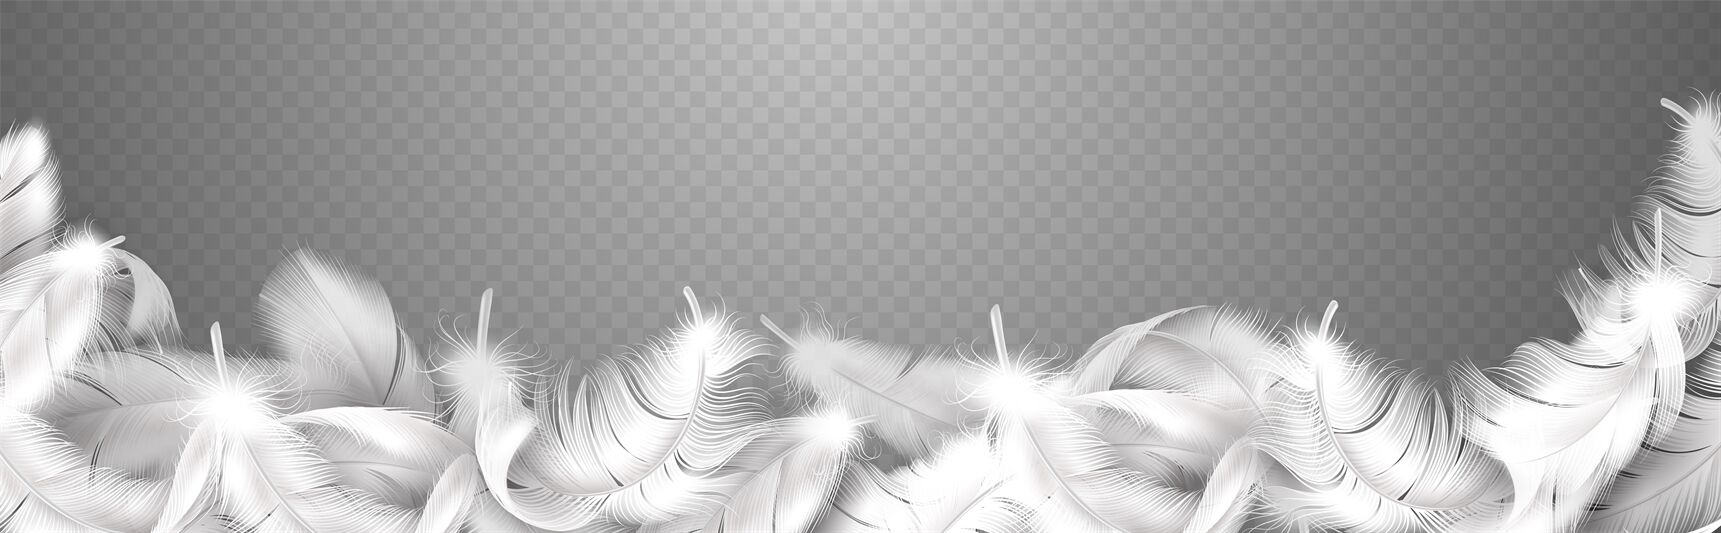 Realistic Feathers White Bird Falling Feather Isolated On White Background  Vector Collection Illustration Of Feather Bird Soft White Plume Stock  Illustration - Download Image Now - iStock